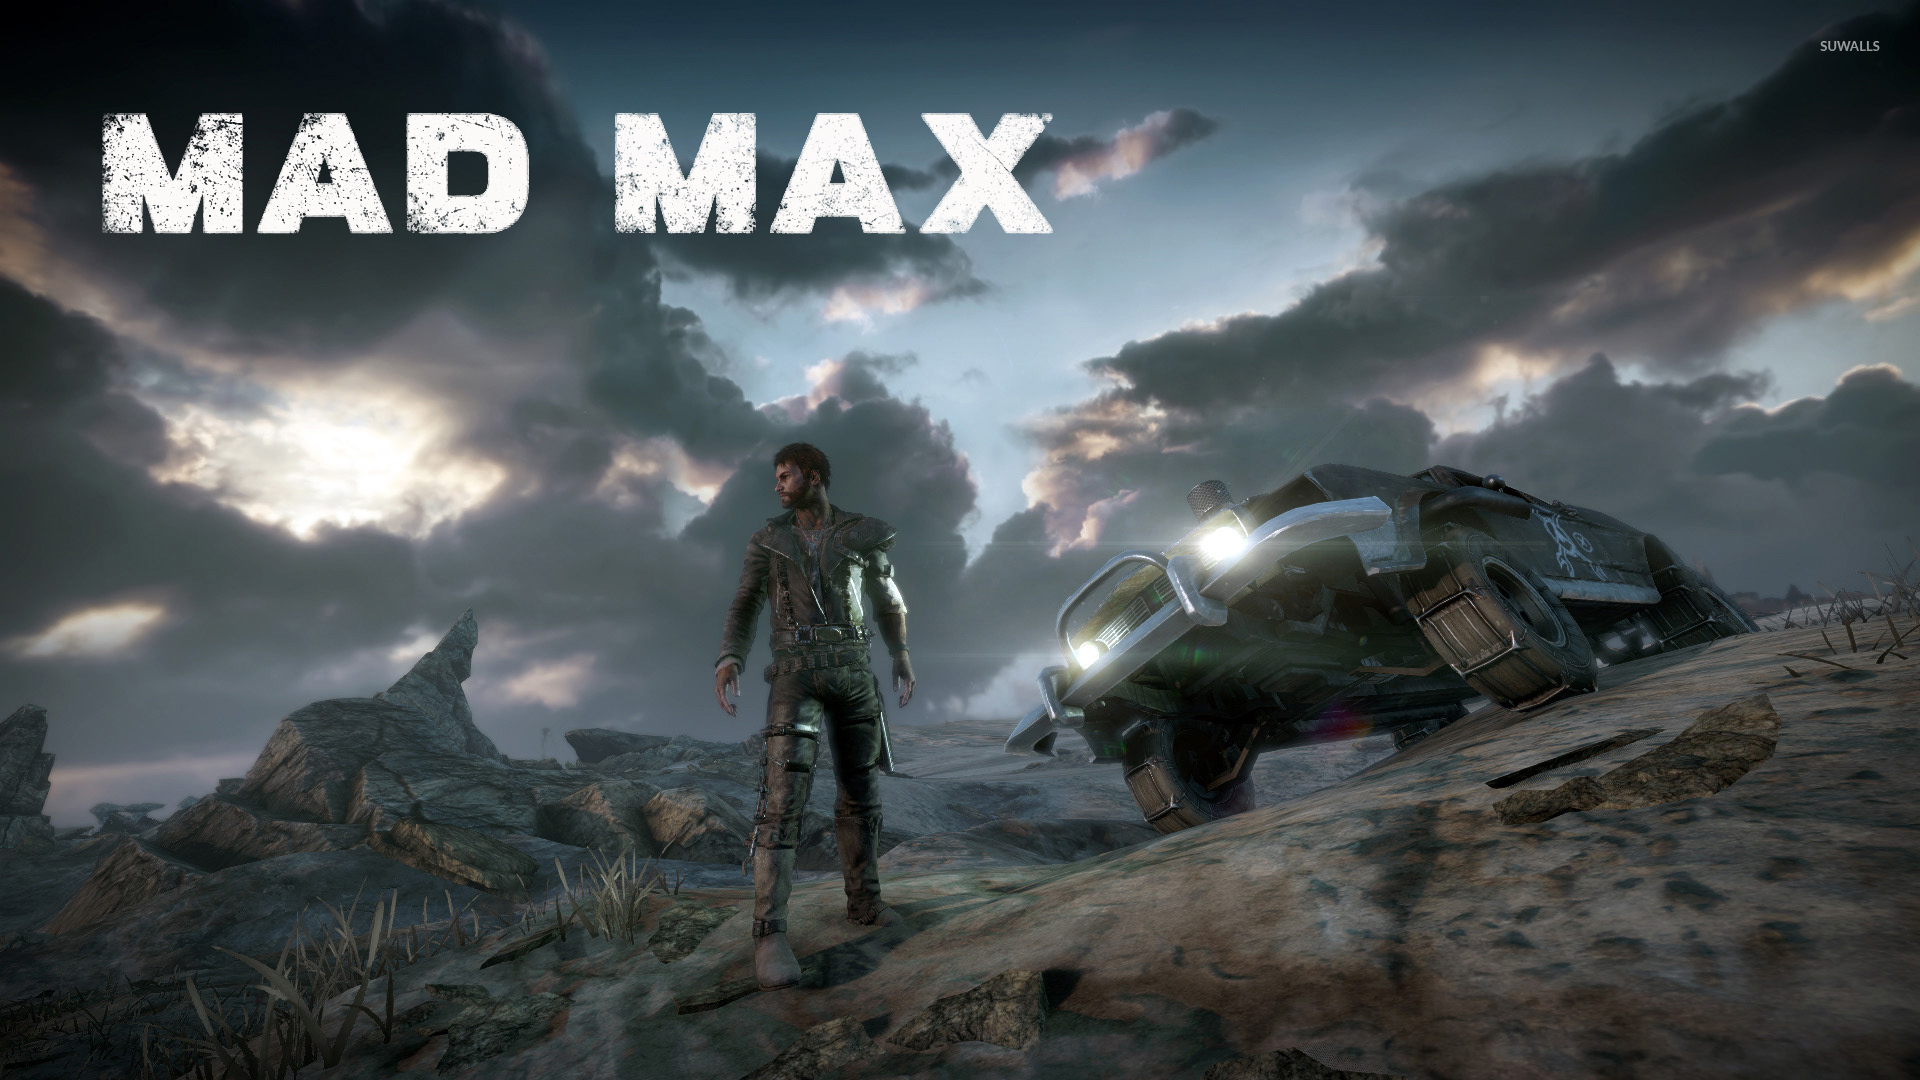 Max in the twilight   Mad Max wallpaper   Game wallpapers   49414